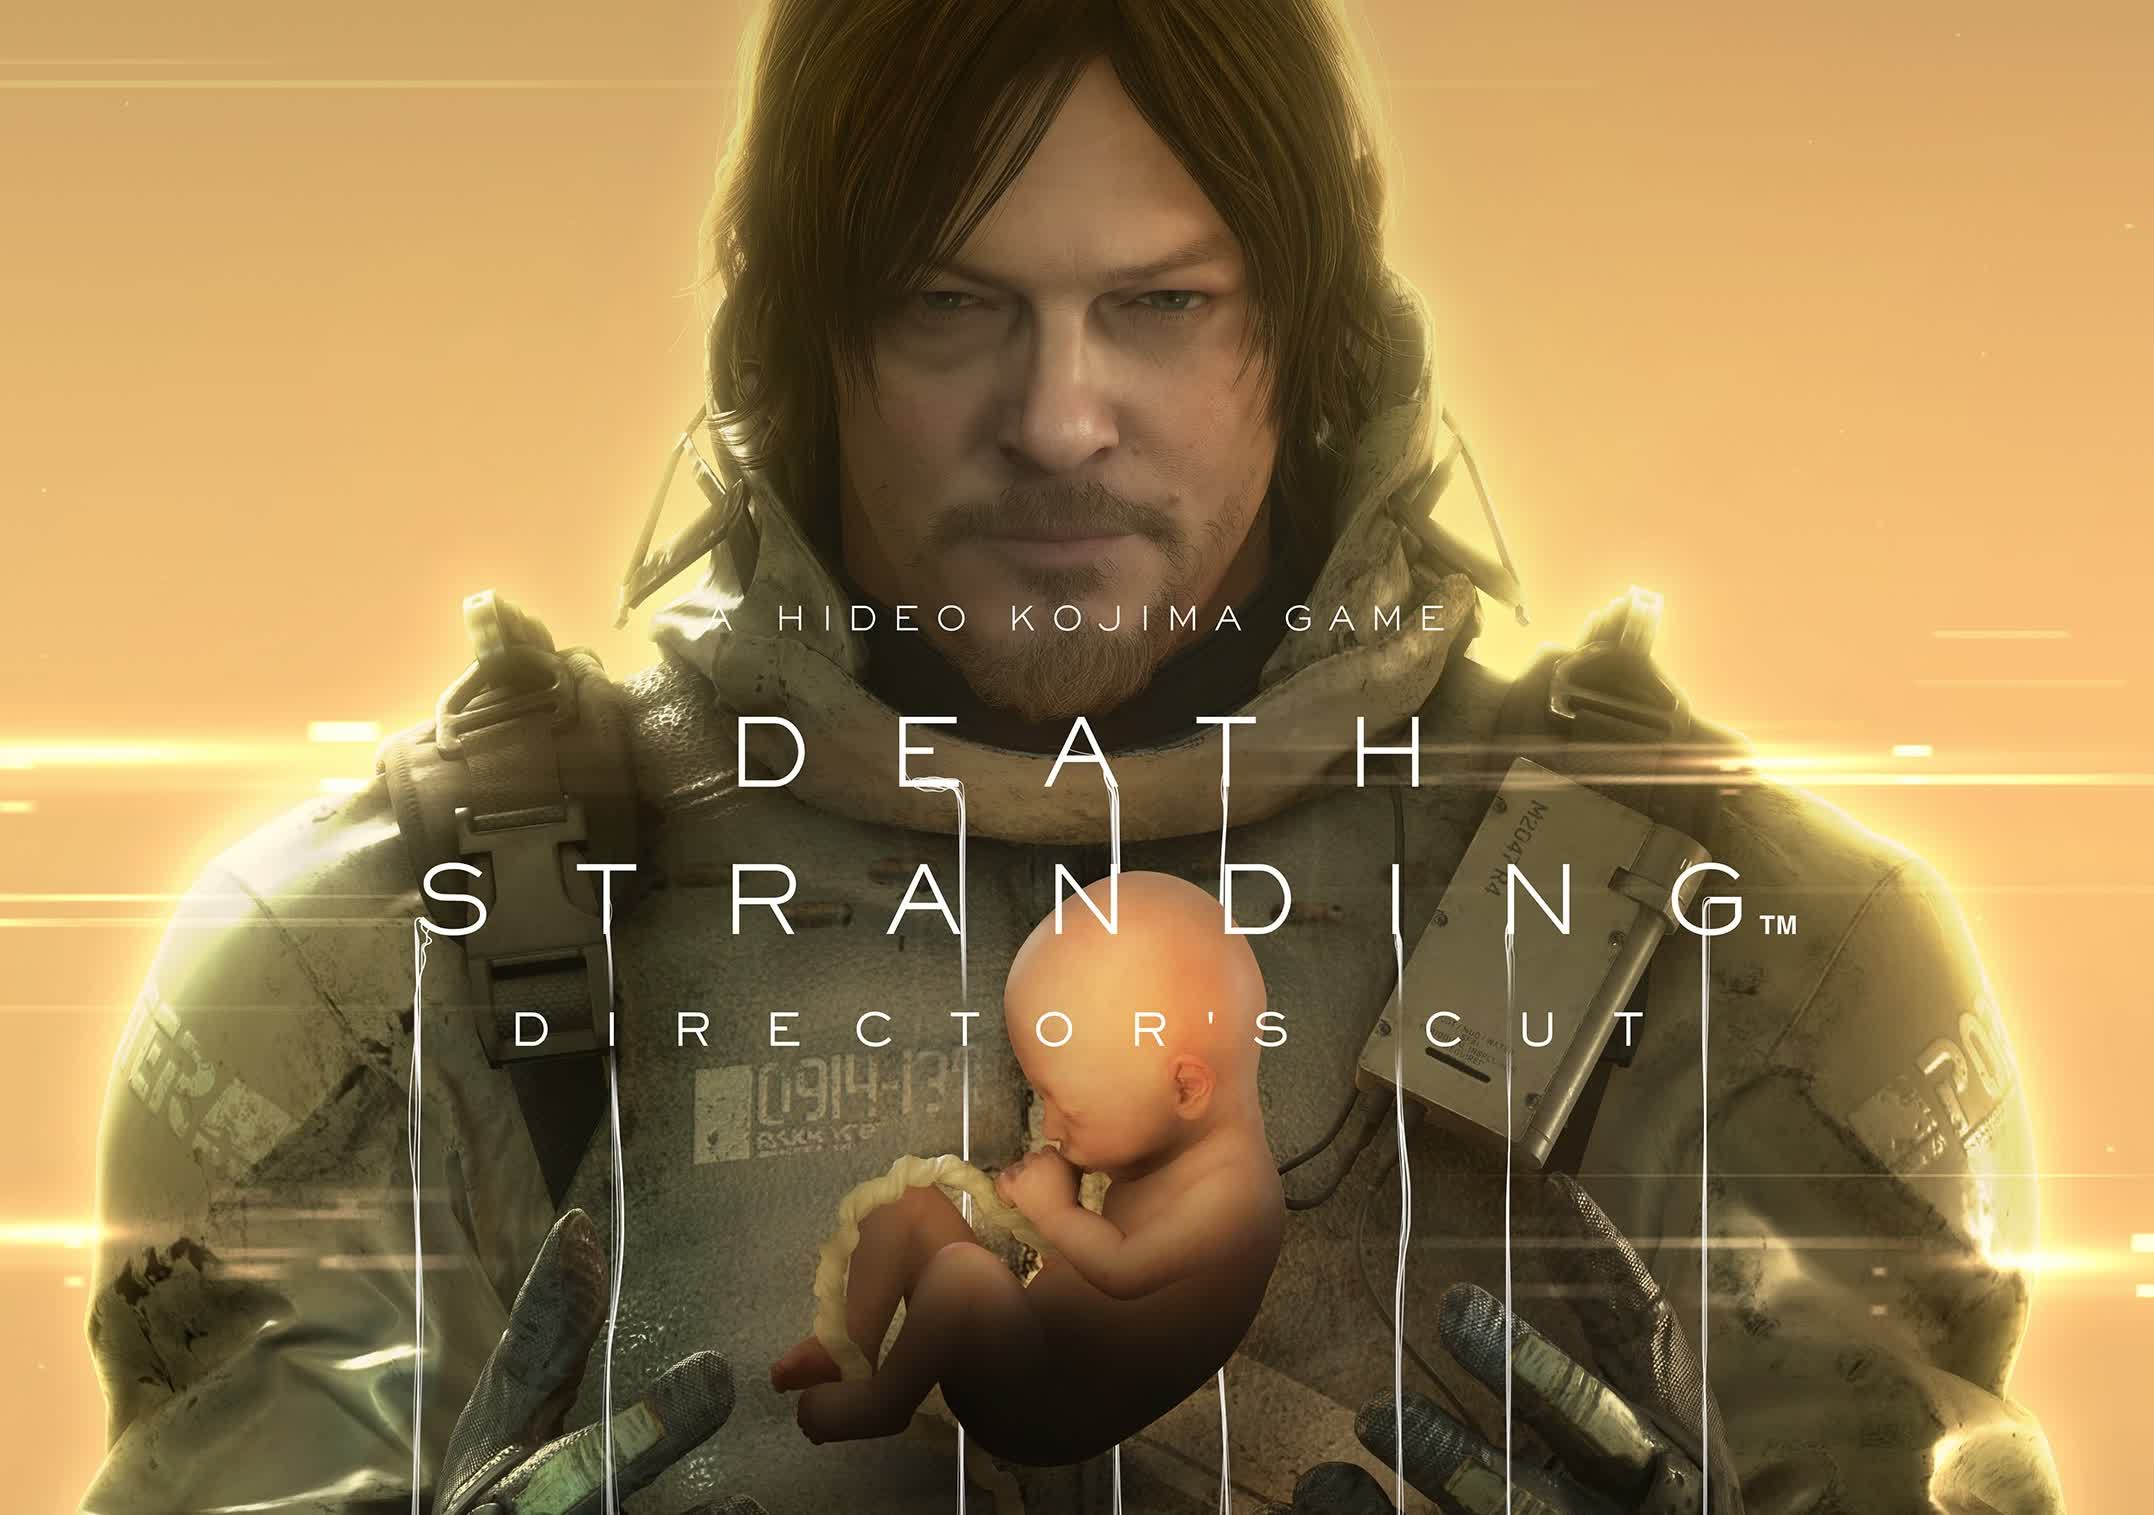 Death Stranding Director's Cut is heading to PC this spring